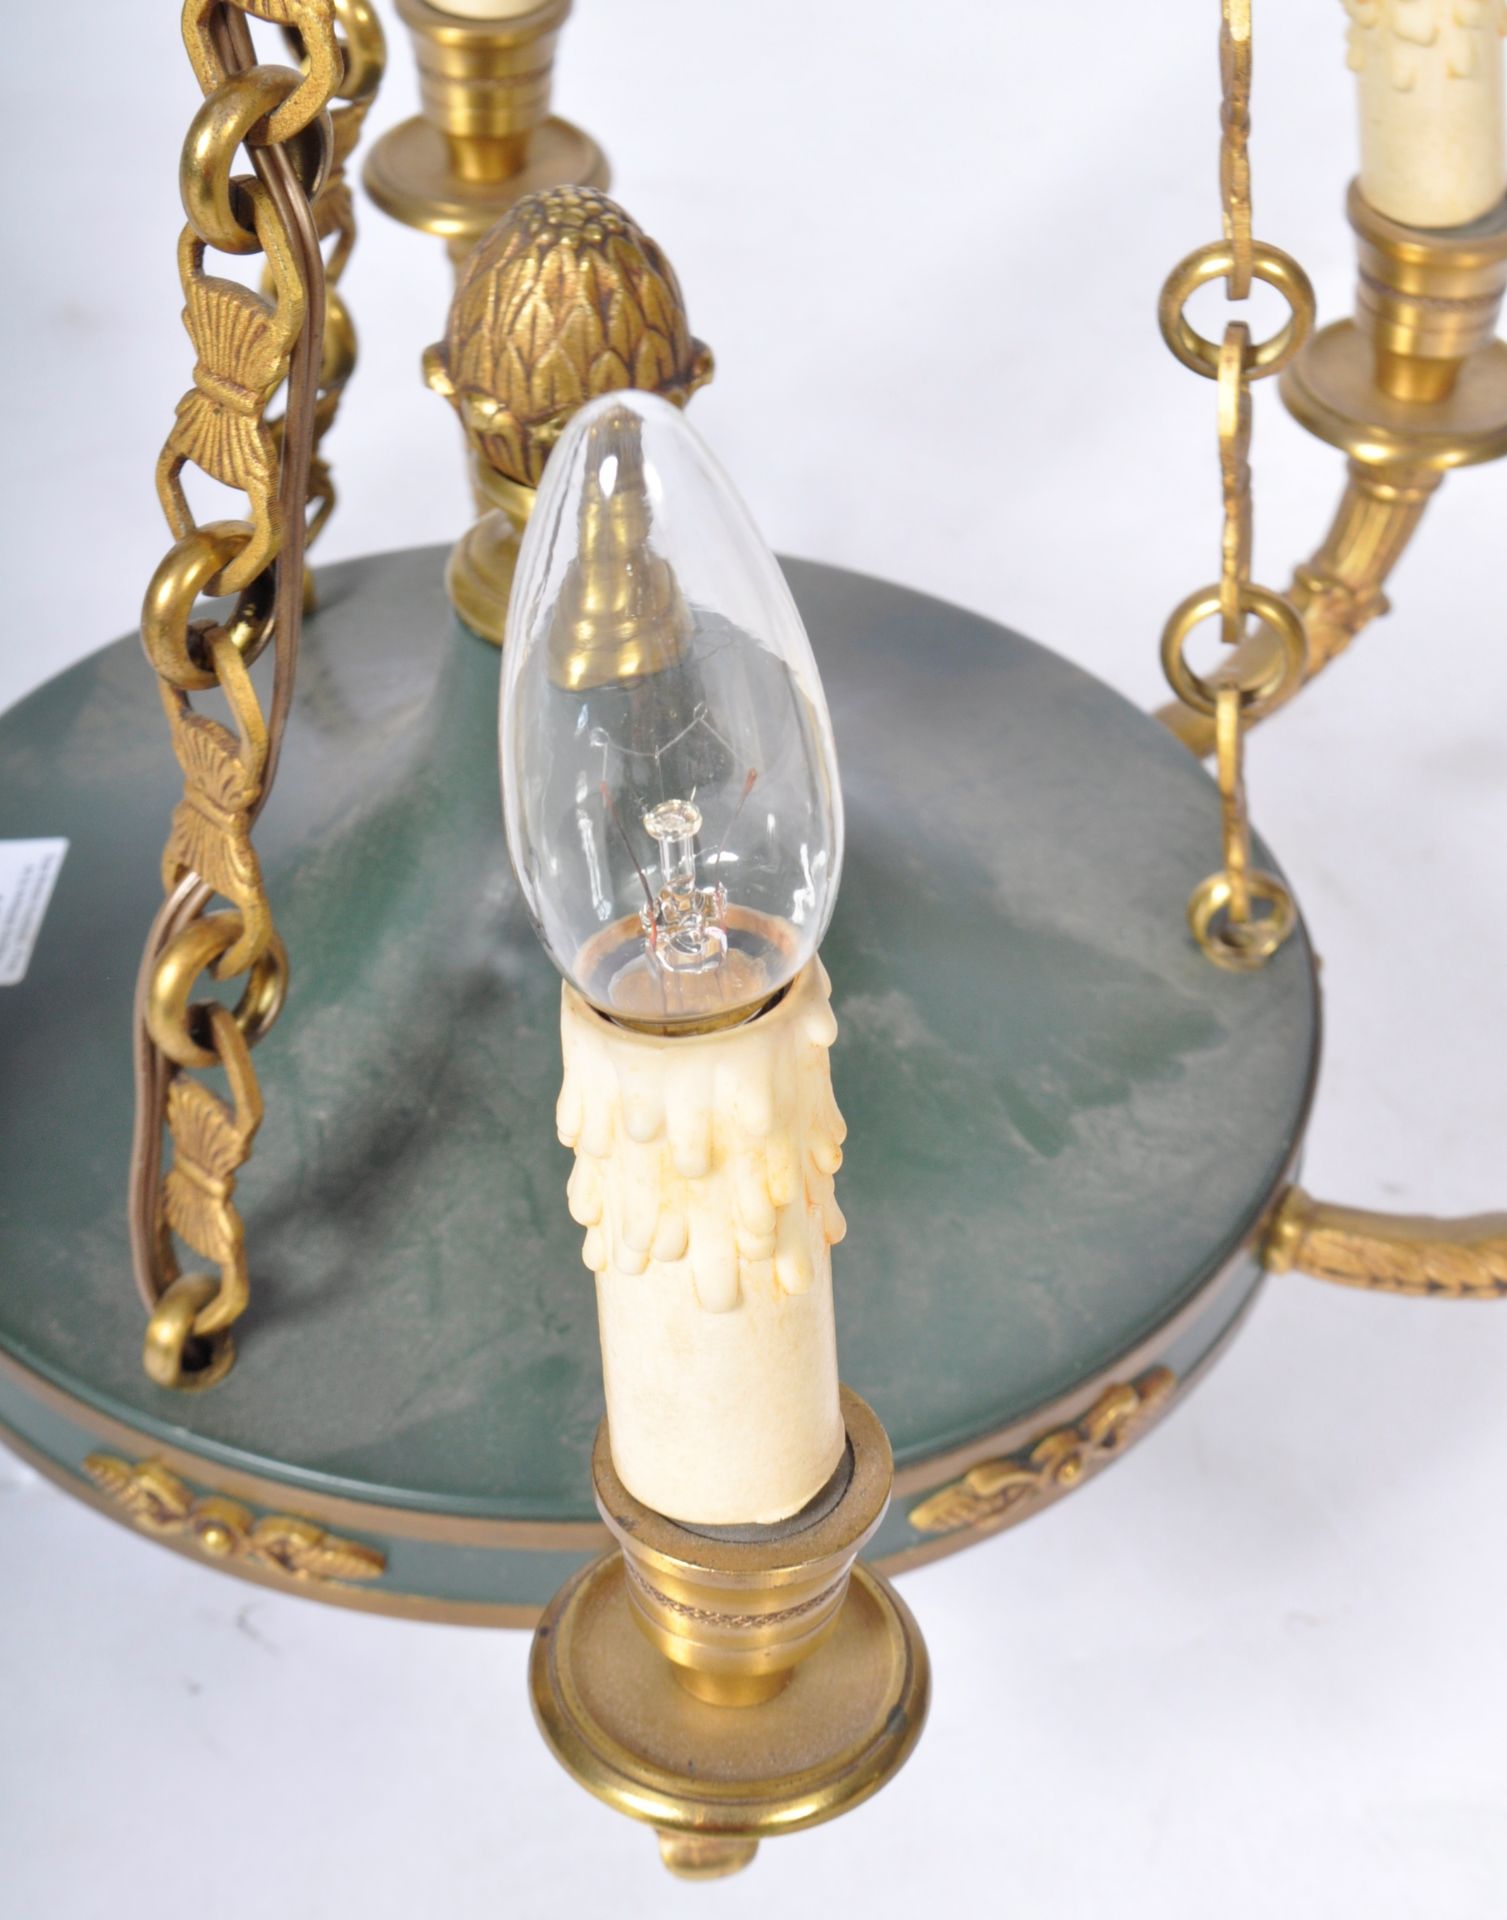 EARLY 20TH CENTURY FRENCH EMPIRE CEILING LIGHT - Image 3 of 5